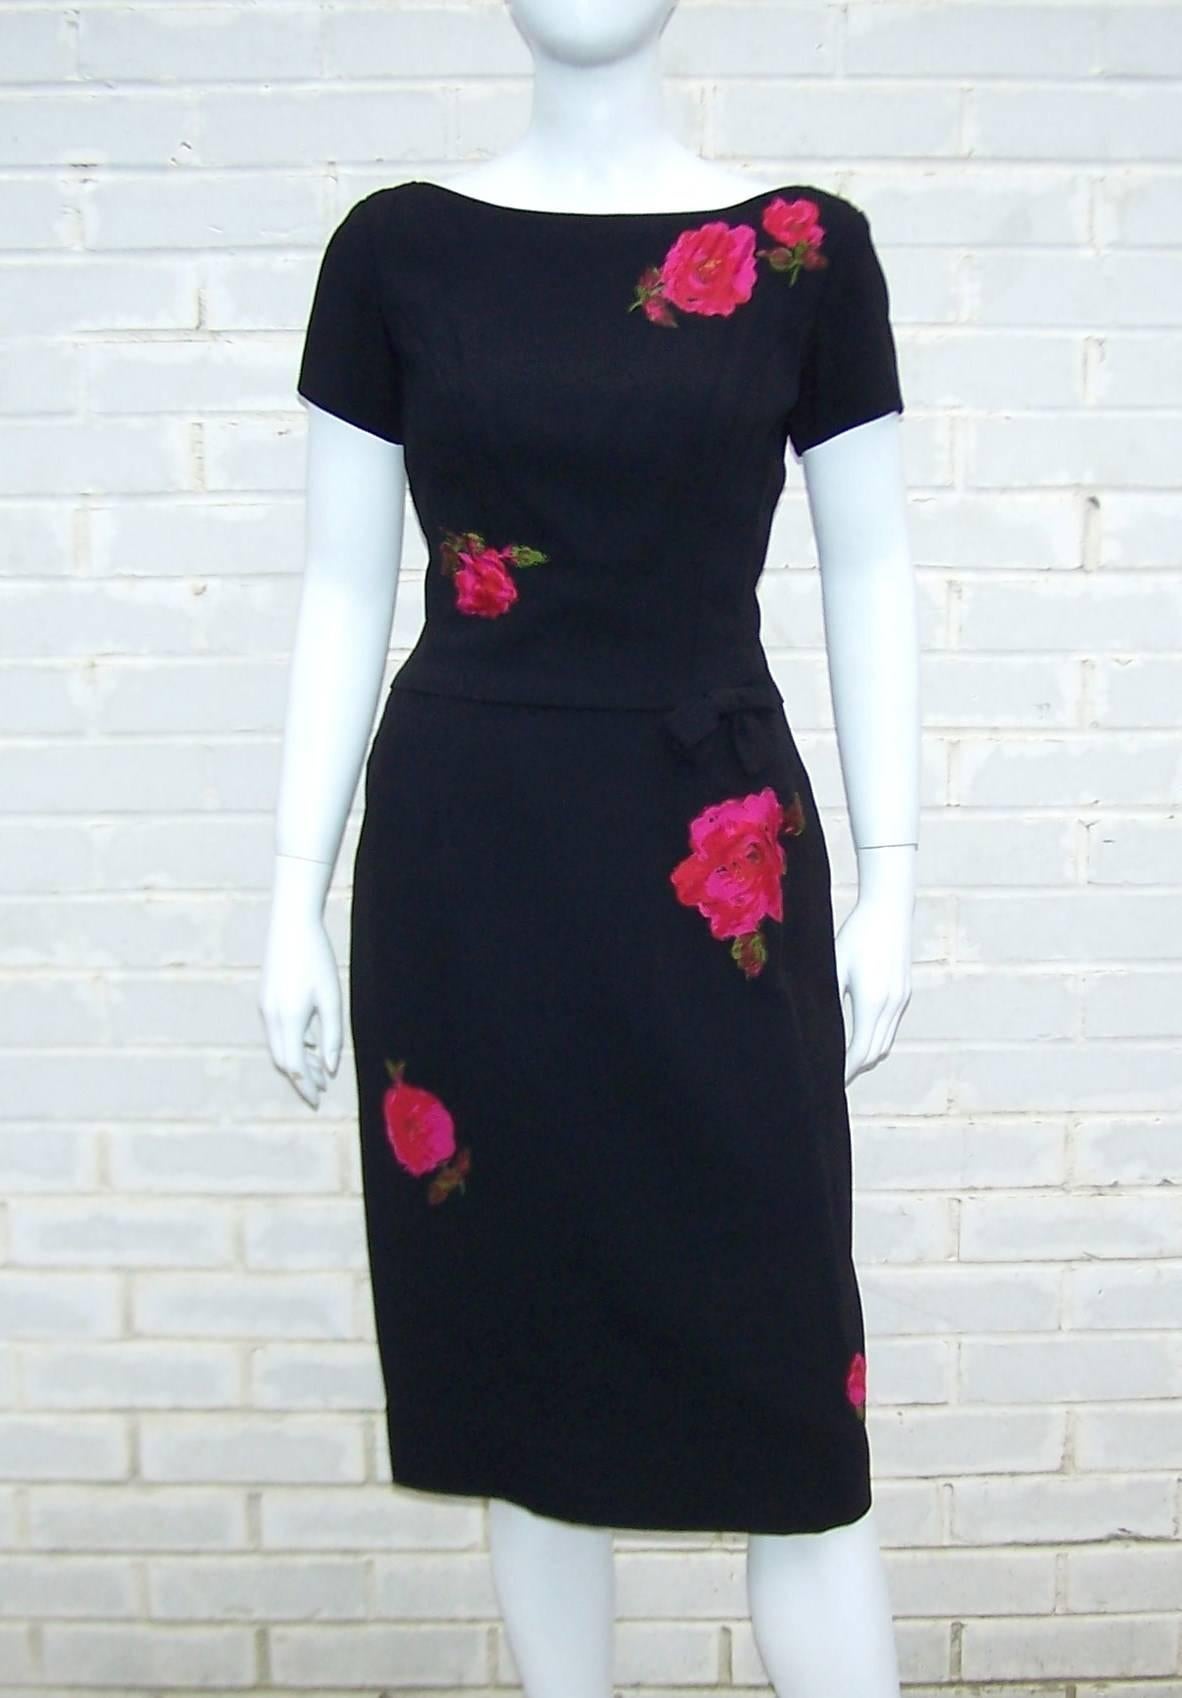 The 'little black dress' with a wiggle and a splash of color...perfect for many occasions and a great vintage staple for your wardrobe.  This little gem is a wool crepe style fabric with scoop back, bow detail and vibrant fuchsia pink and red rose